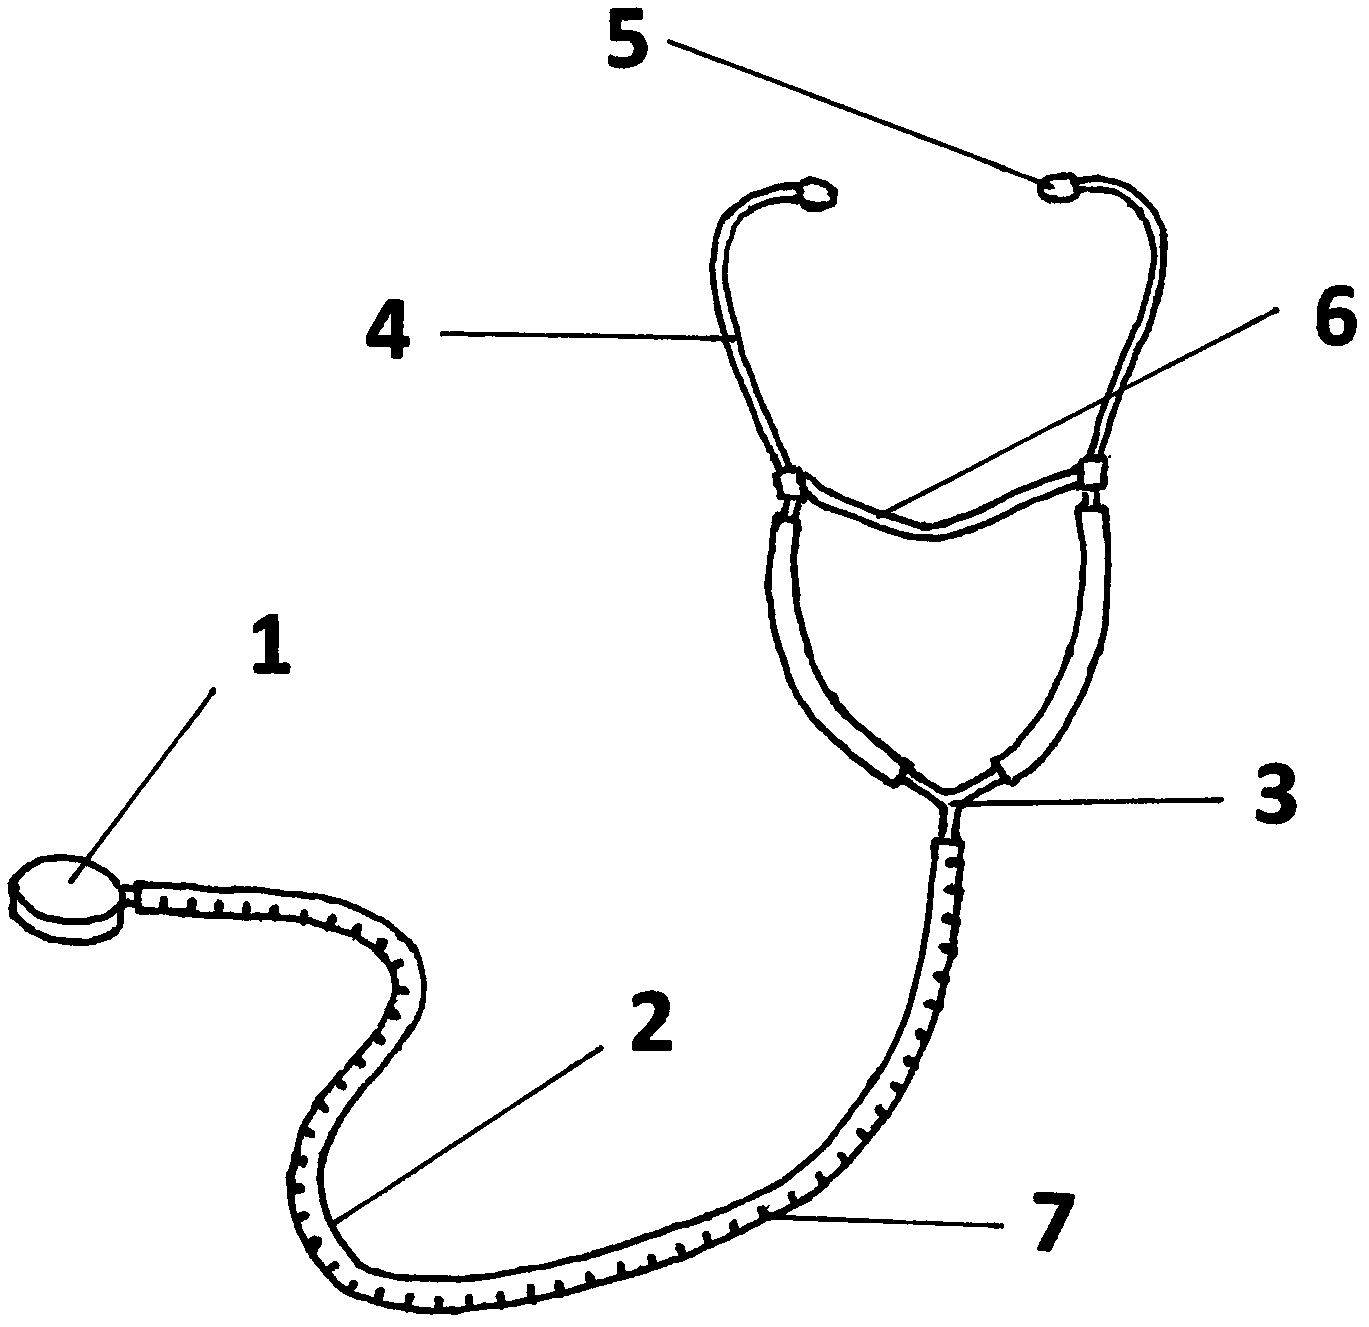 Stethoscope with scale